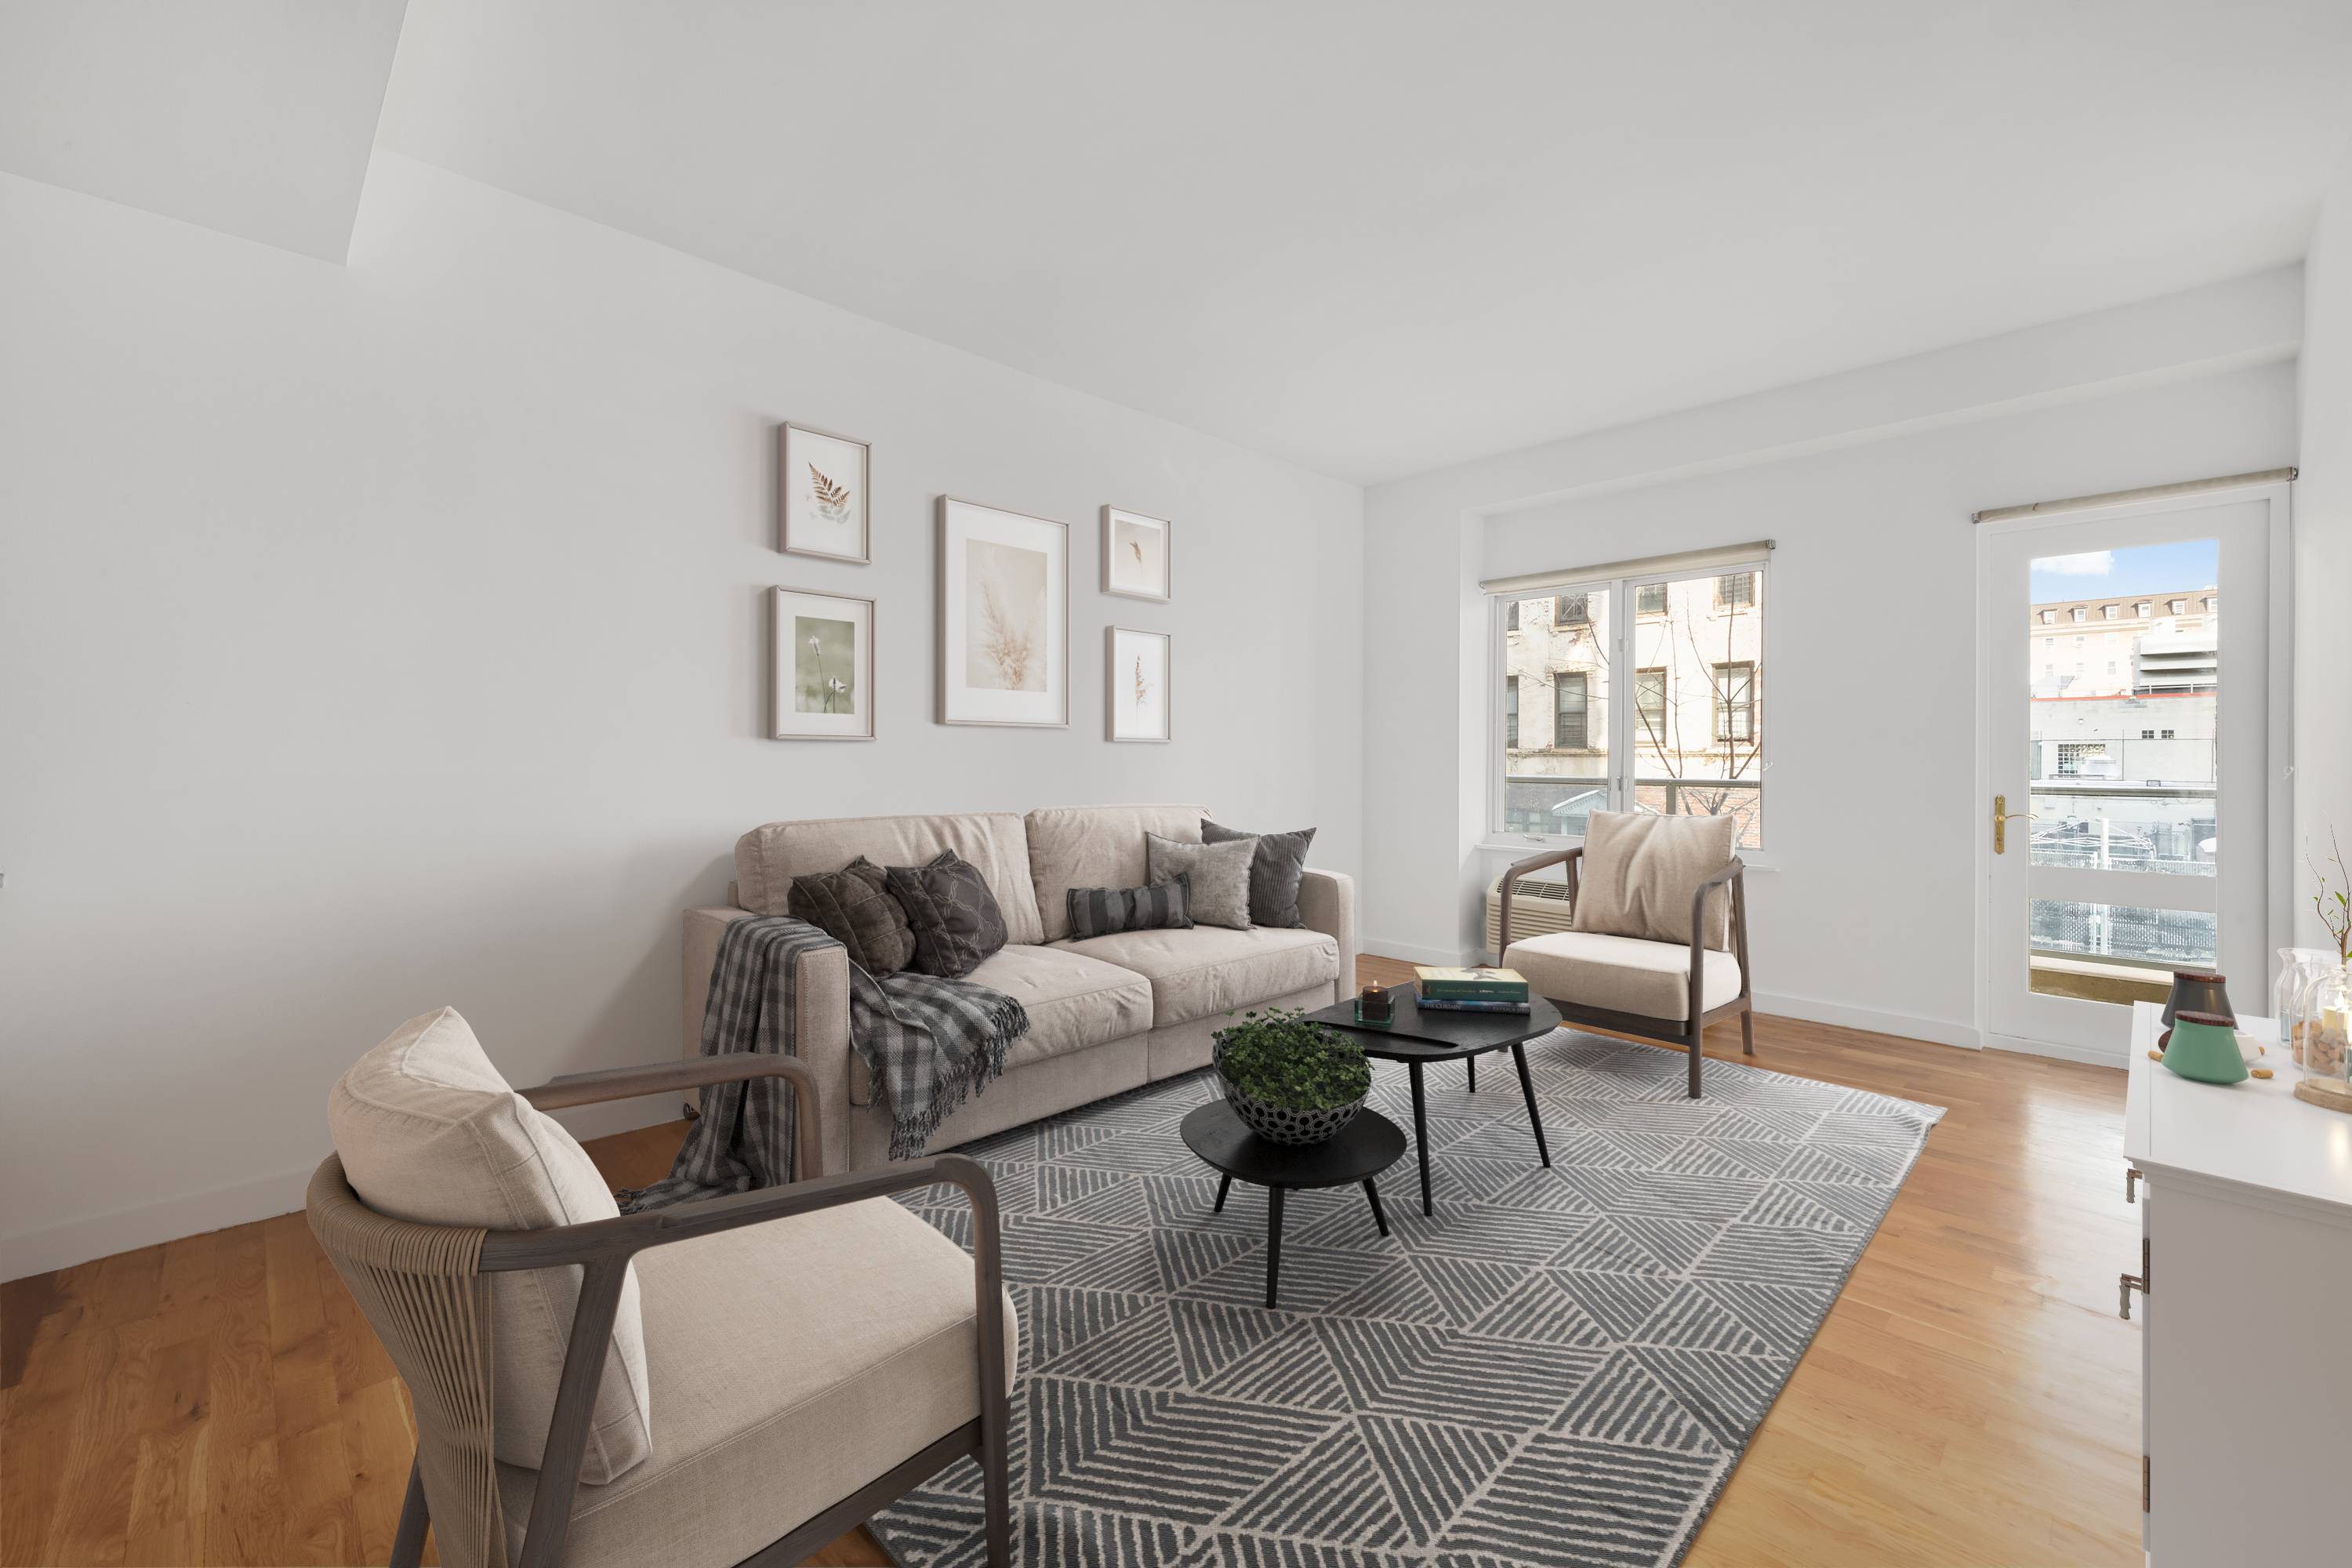 Renovated and well proportioned one bedroom home with a private balcony at Aurora Condominiums in East Harlem.